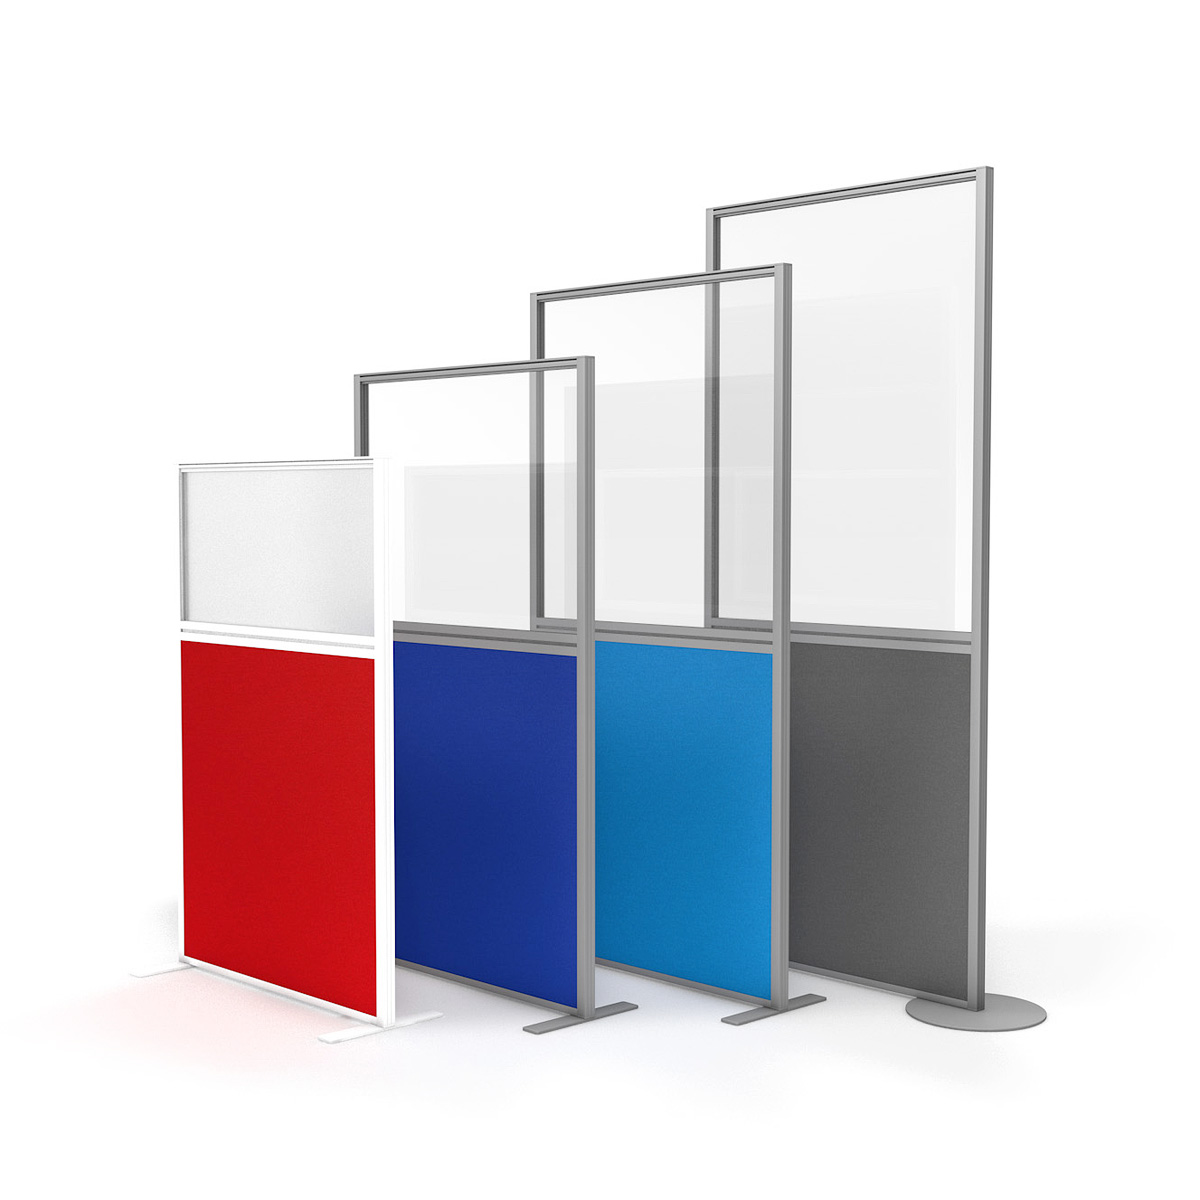 FRONTIER® Free Standing Part-Glazed Office Partition Screen Are Available in Four Heights